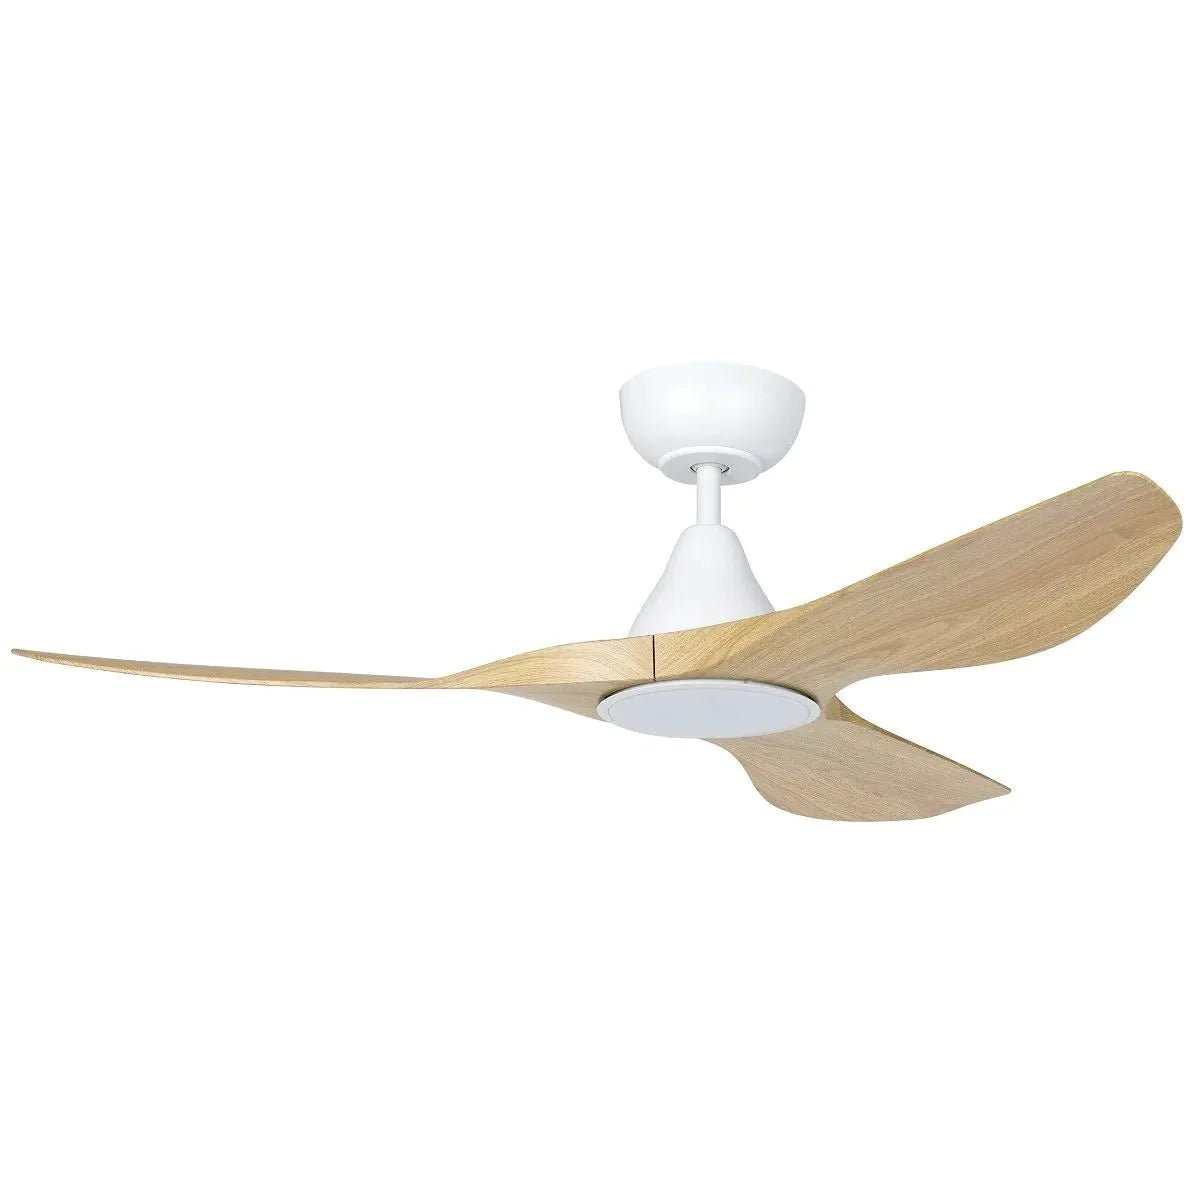 Eglo Surf 60" DC WiFi Ceiling Fan with LED Light & Remote Control - Mases LightingEglo